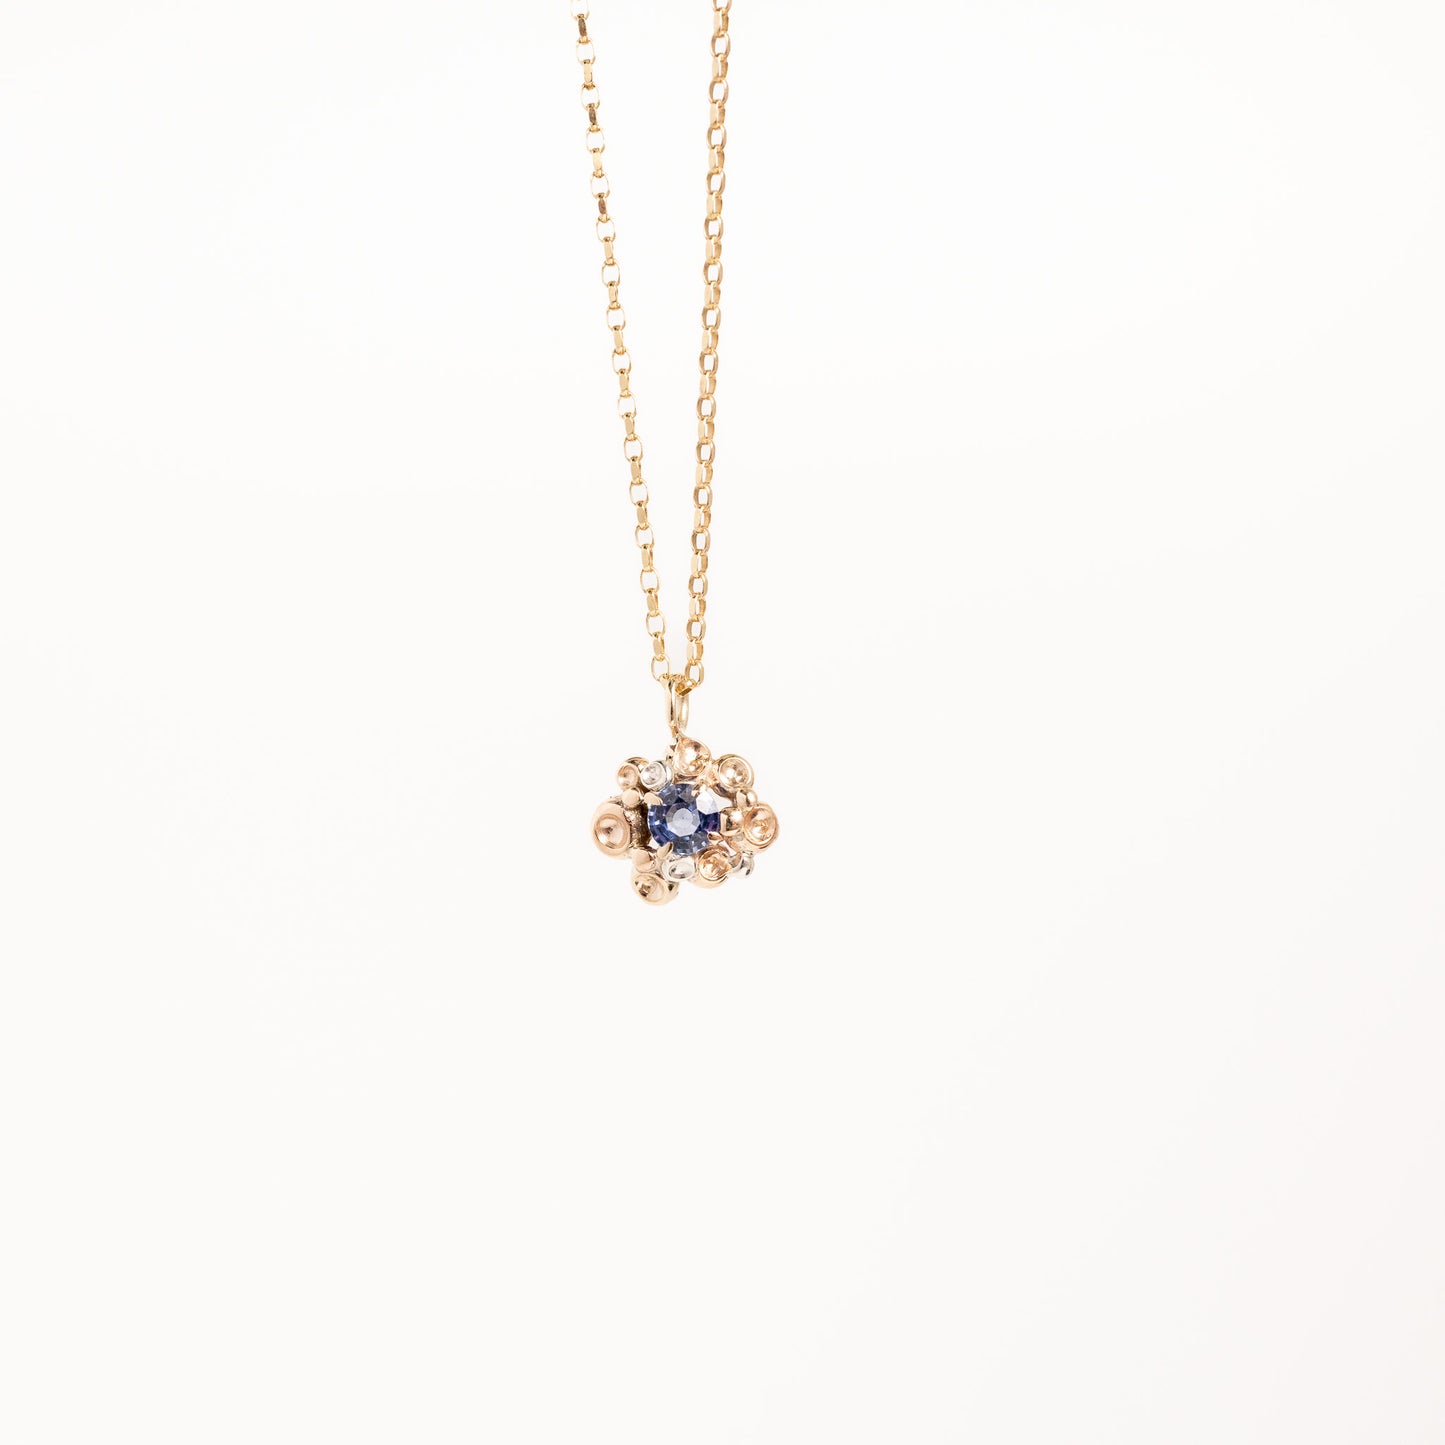 Barnacle Gold Pendant Necklace with Sapphire